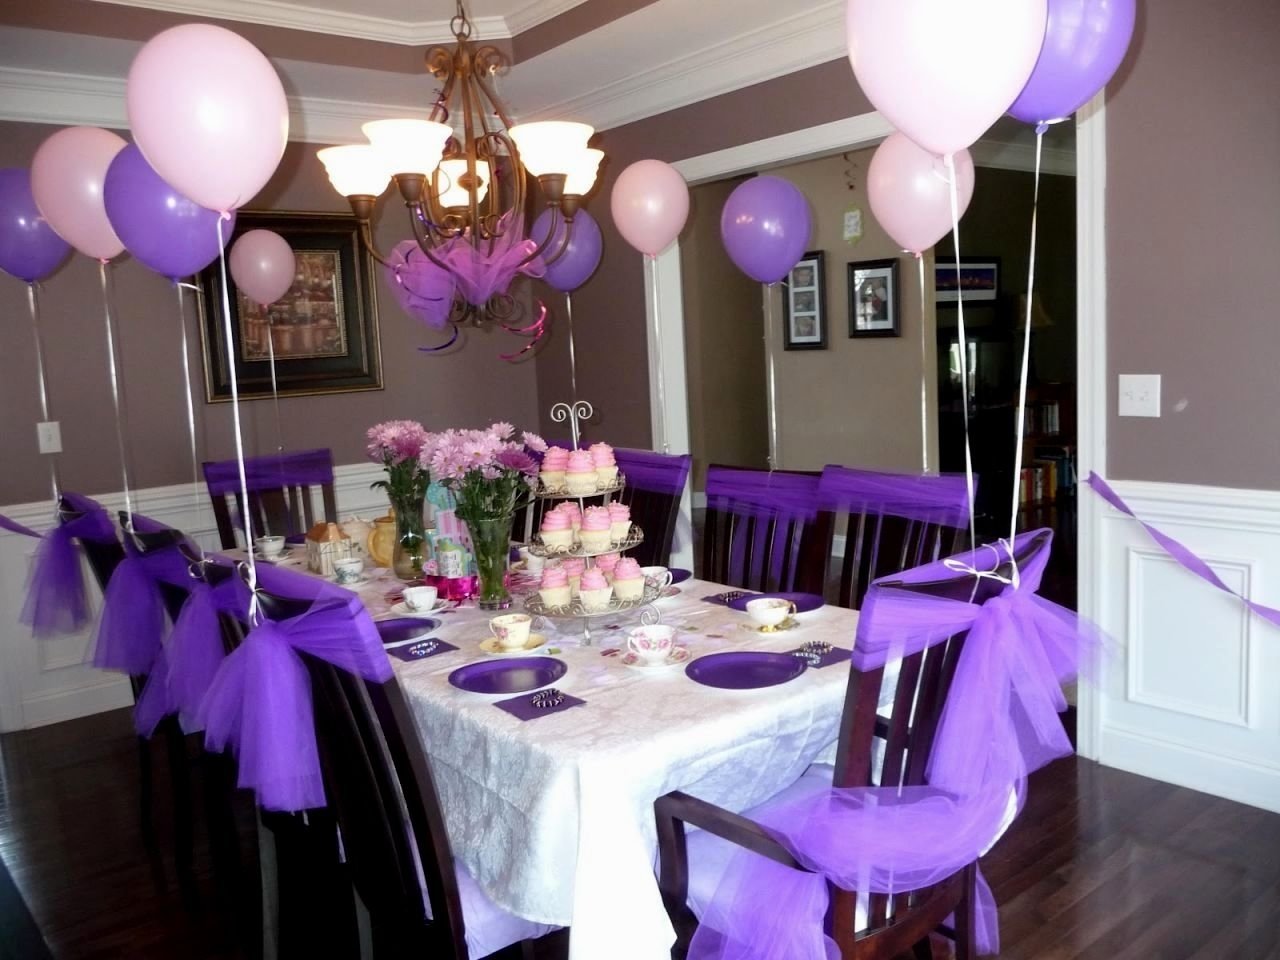 10 Ideal Birthday Party Centerpiece Ideas For Adults purple party ideas for adults decorating of party 2022